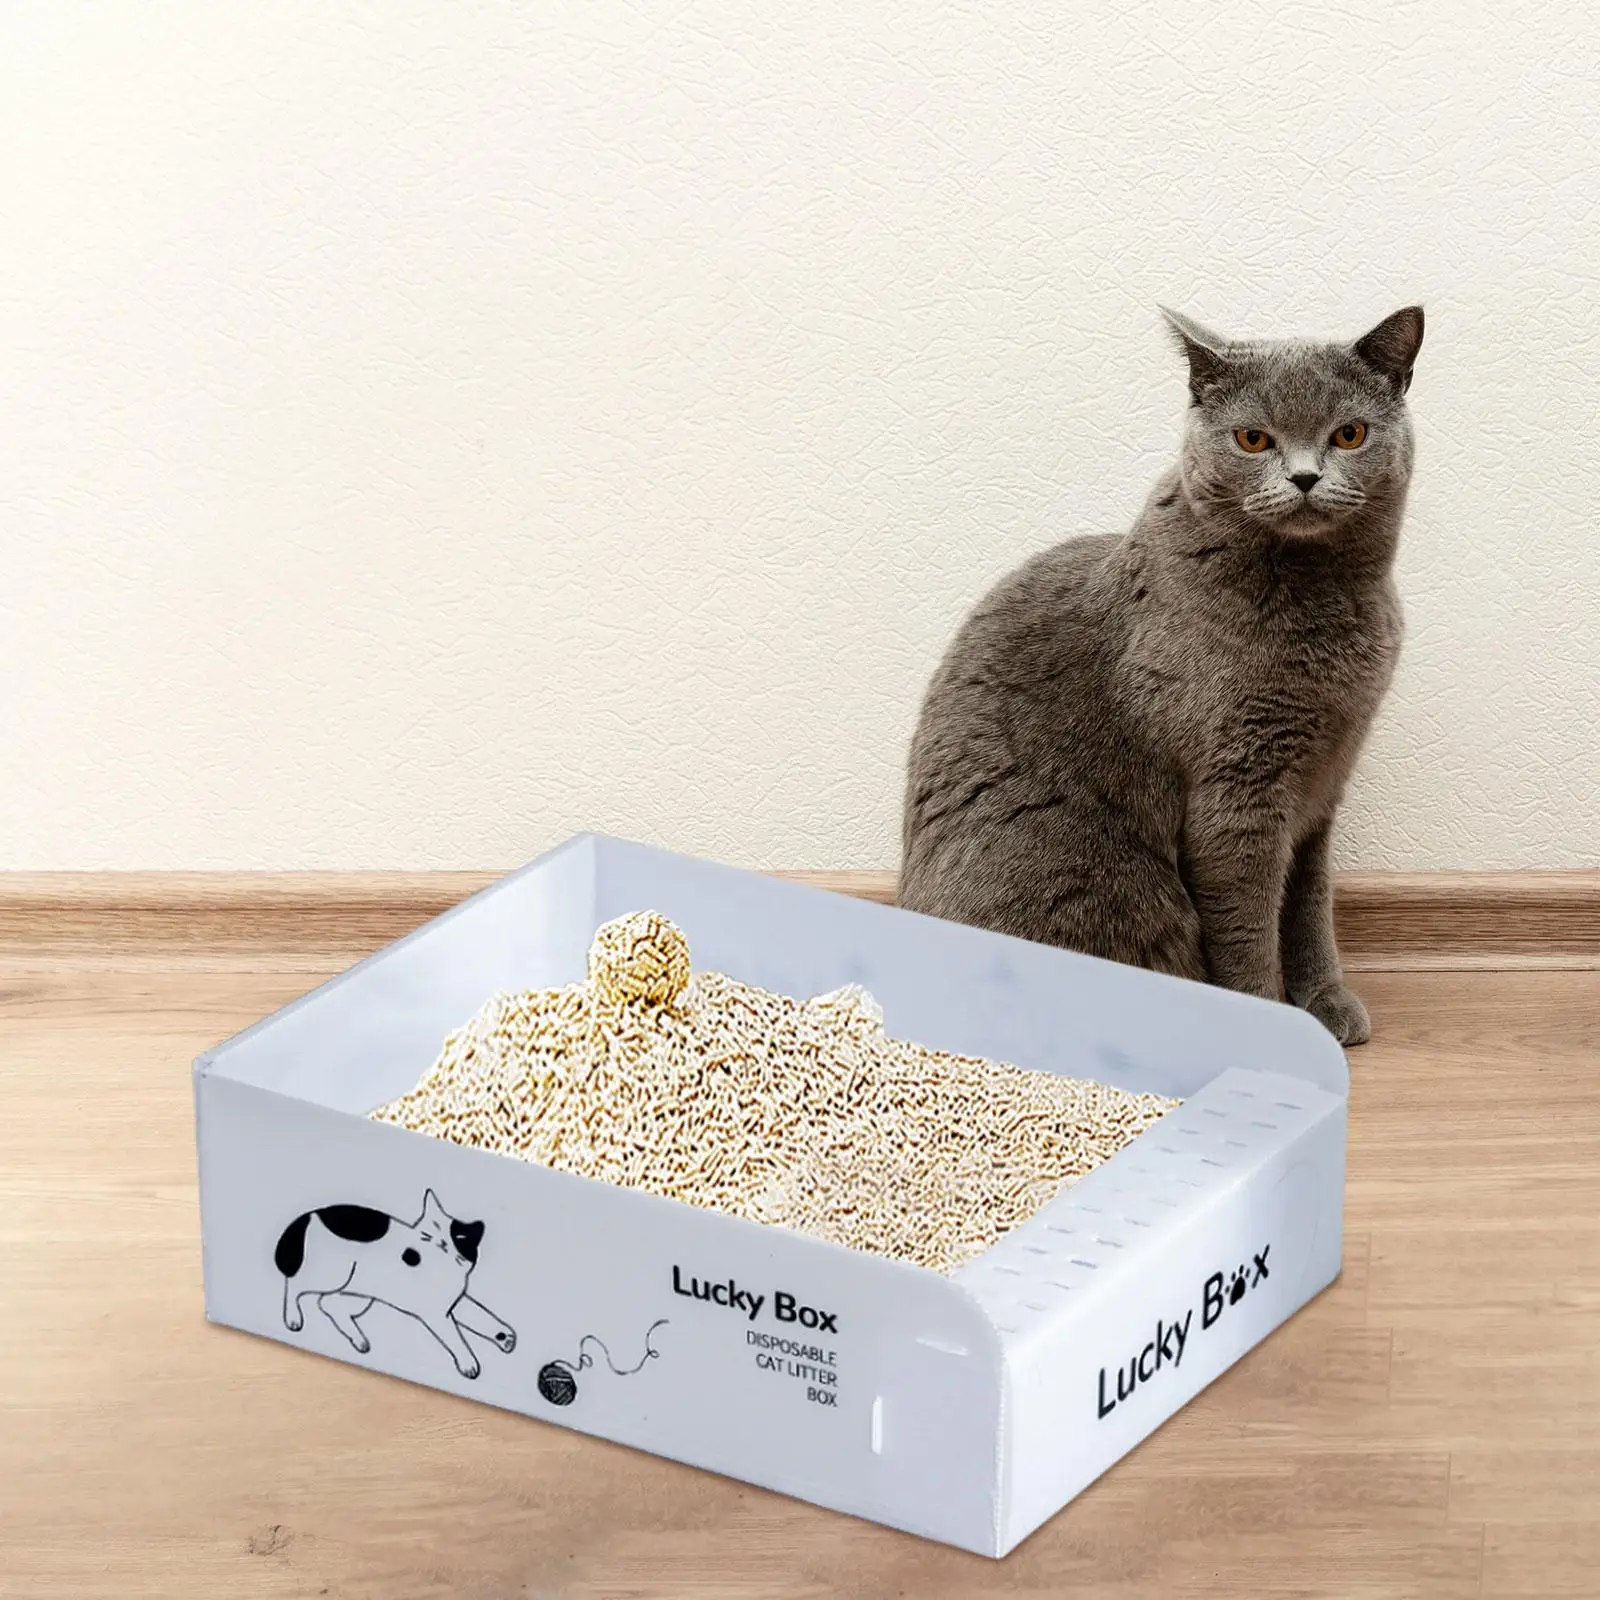 Disposable Cat Litter Box Waterproof Open Top Pet Cat Litter Box Kitten Litter Pan Litter Tray for Puppy Small Animals Bunny